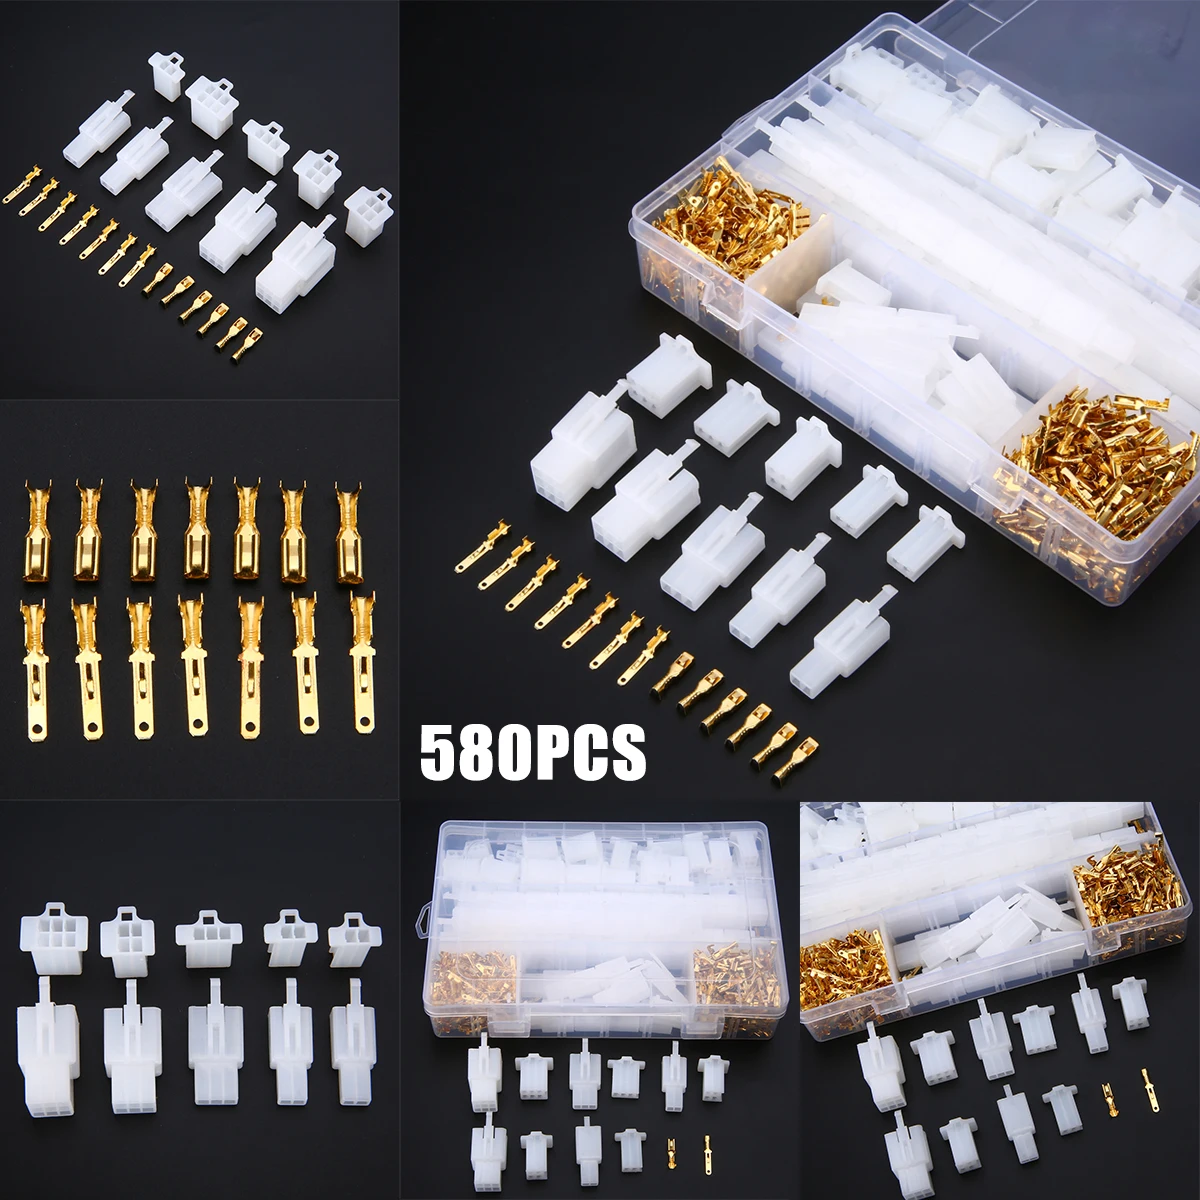 High Quality 580Pcs Electrical Wire Connector Terminal 2.8mm 2/3/4/6/9 Pin Male Female Terminals for Motorcycle Quad Bike Car